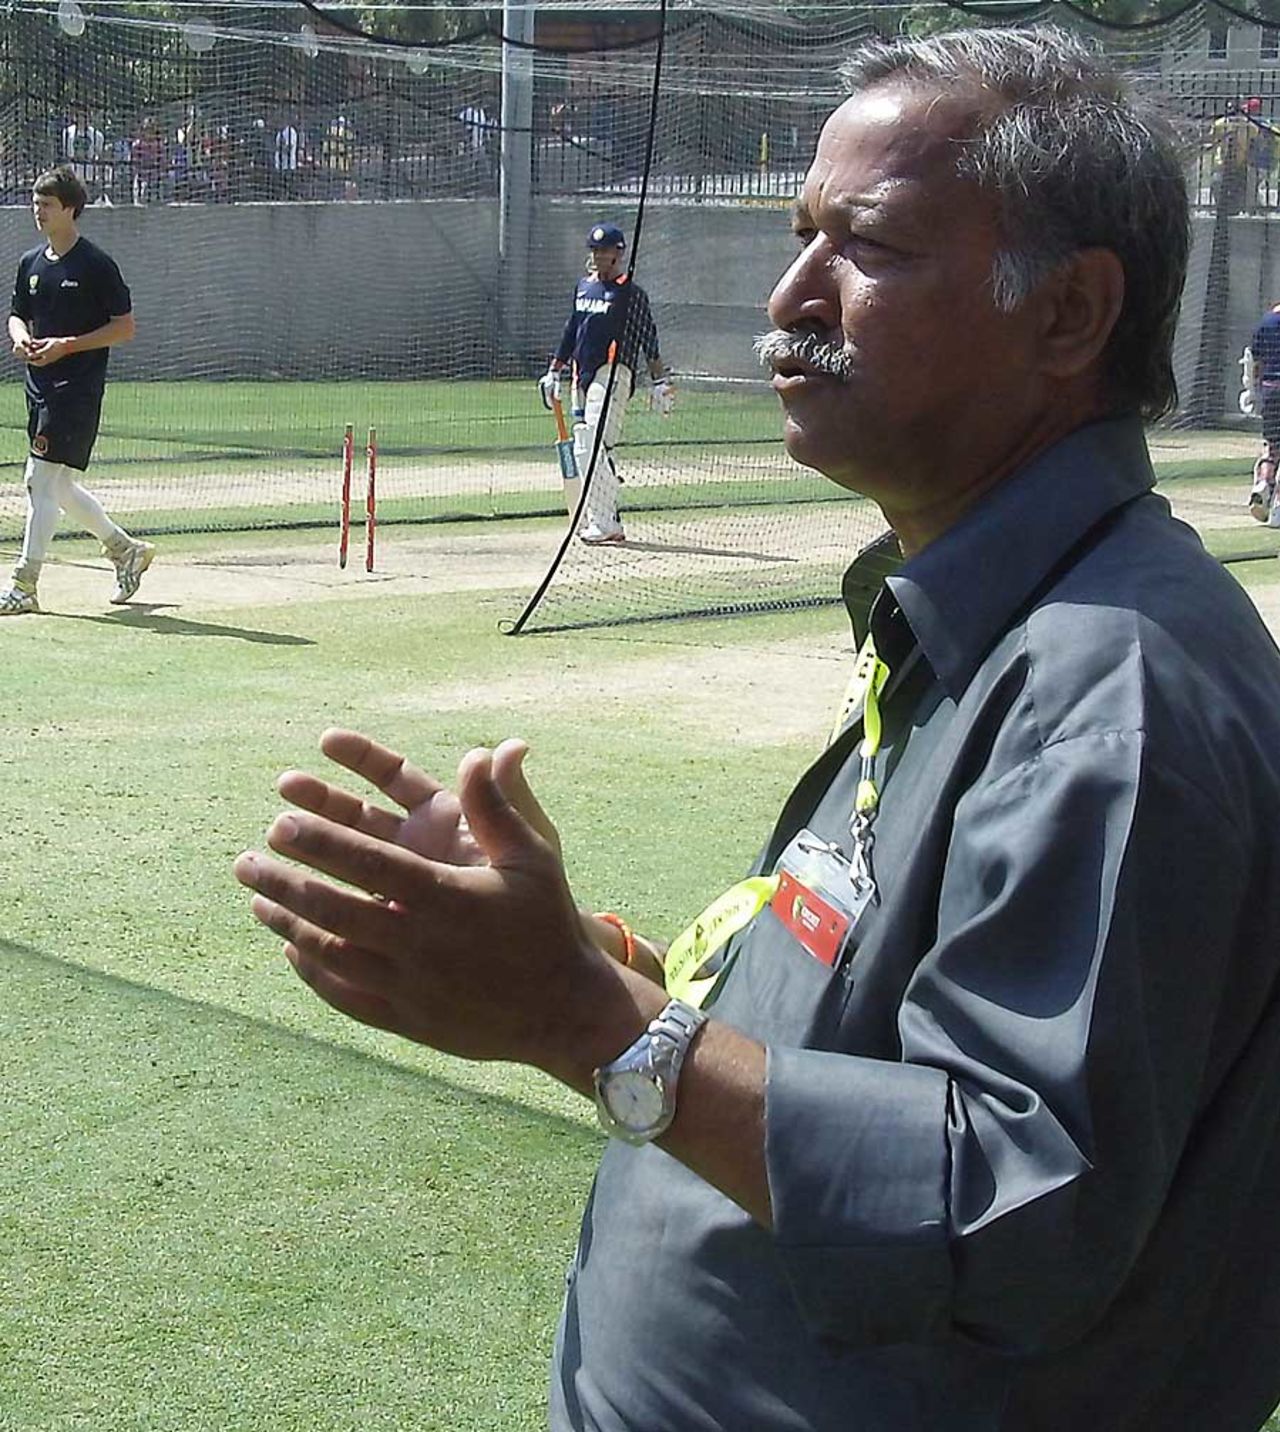 India's manager Shivlal Yadav at the nets, Melbourne, December 24, 2011